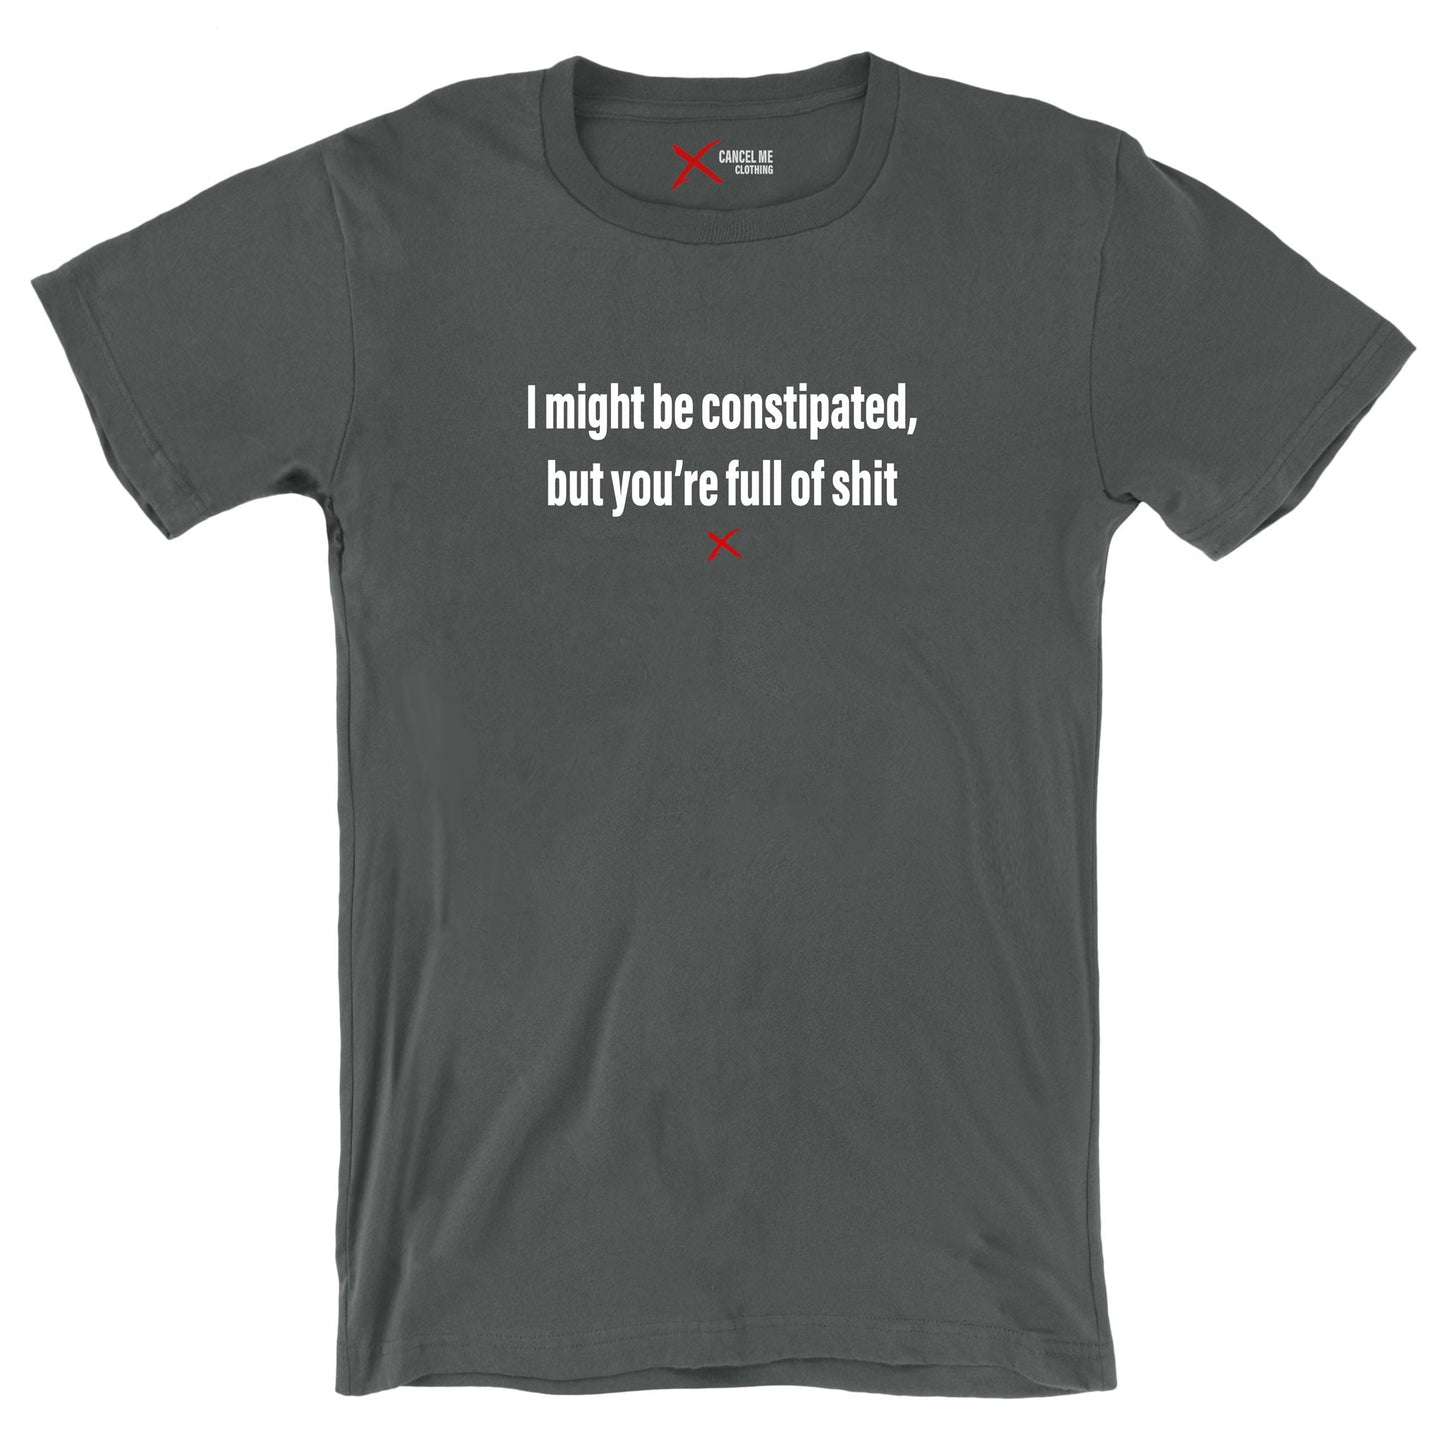 I might be constipated, but you're full of shit - Shirt